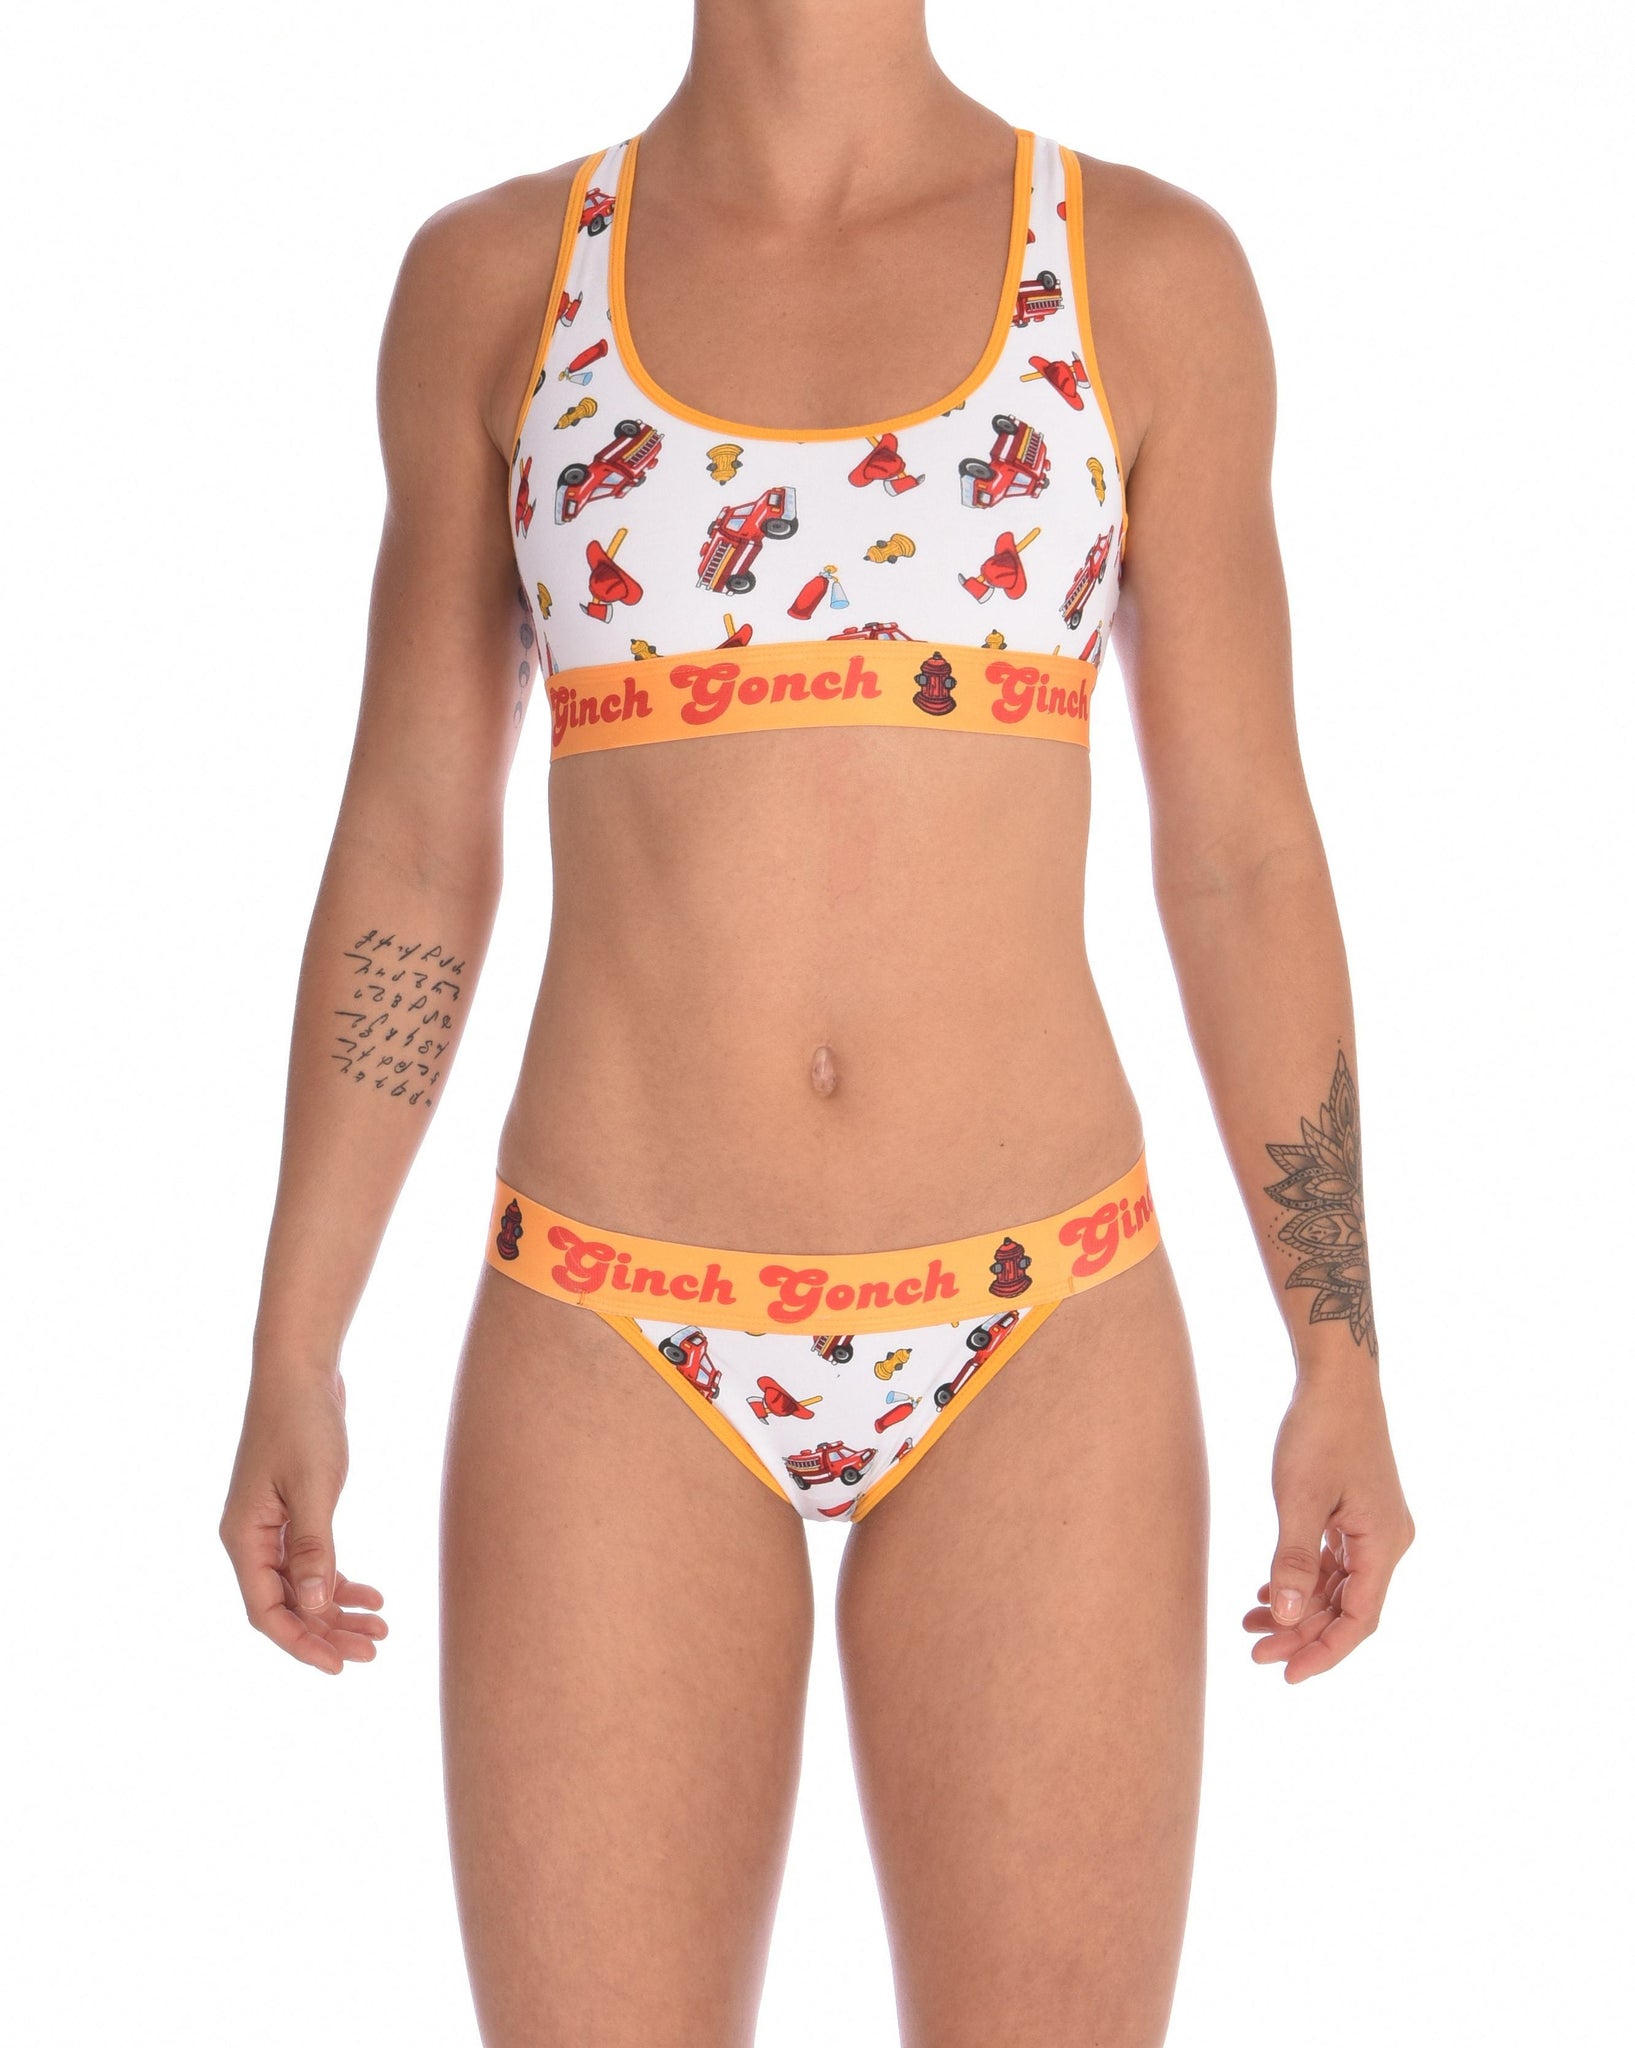 Ginch Gonch GG Fire Fighters thong women's underwear y front white fabric with fire engines hats and hydrants, yellow trim and printed yellow waistband front shown with matching sports bra